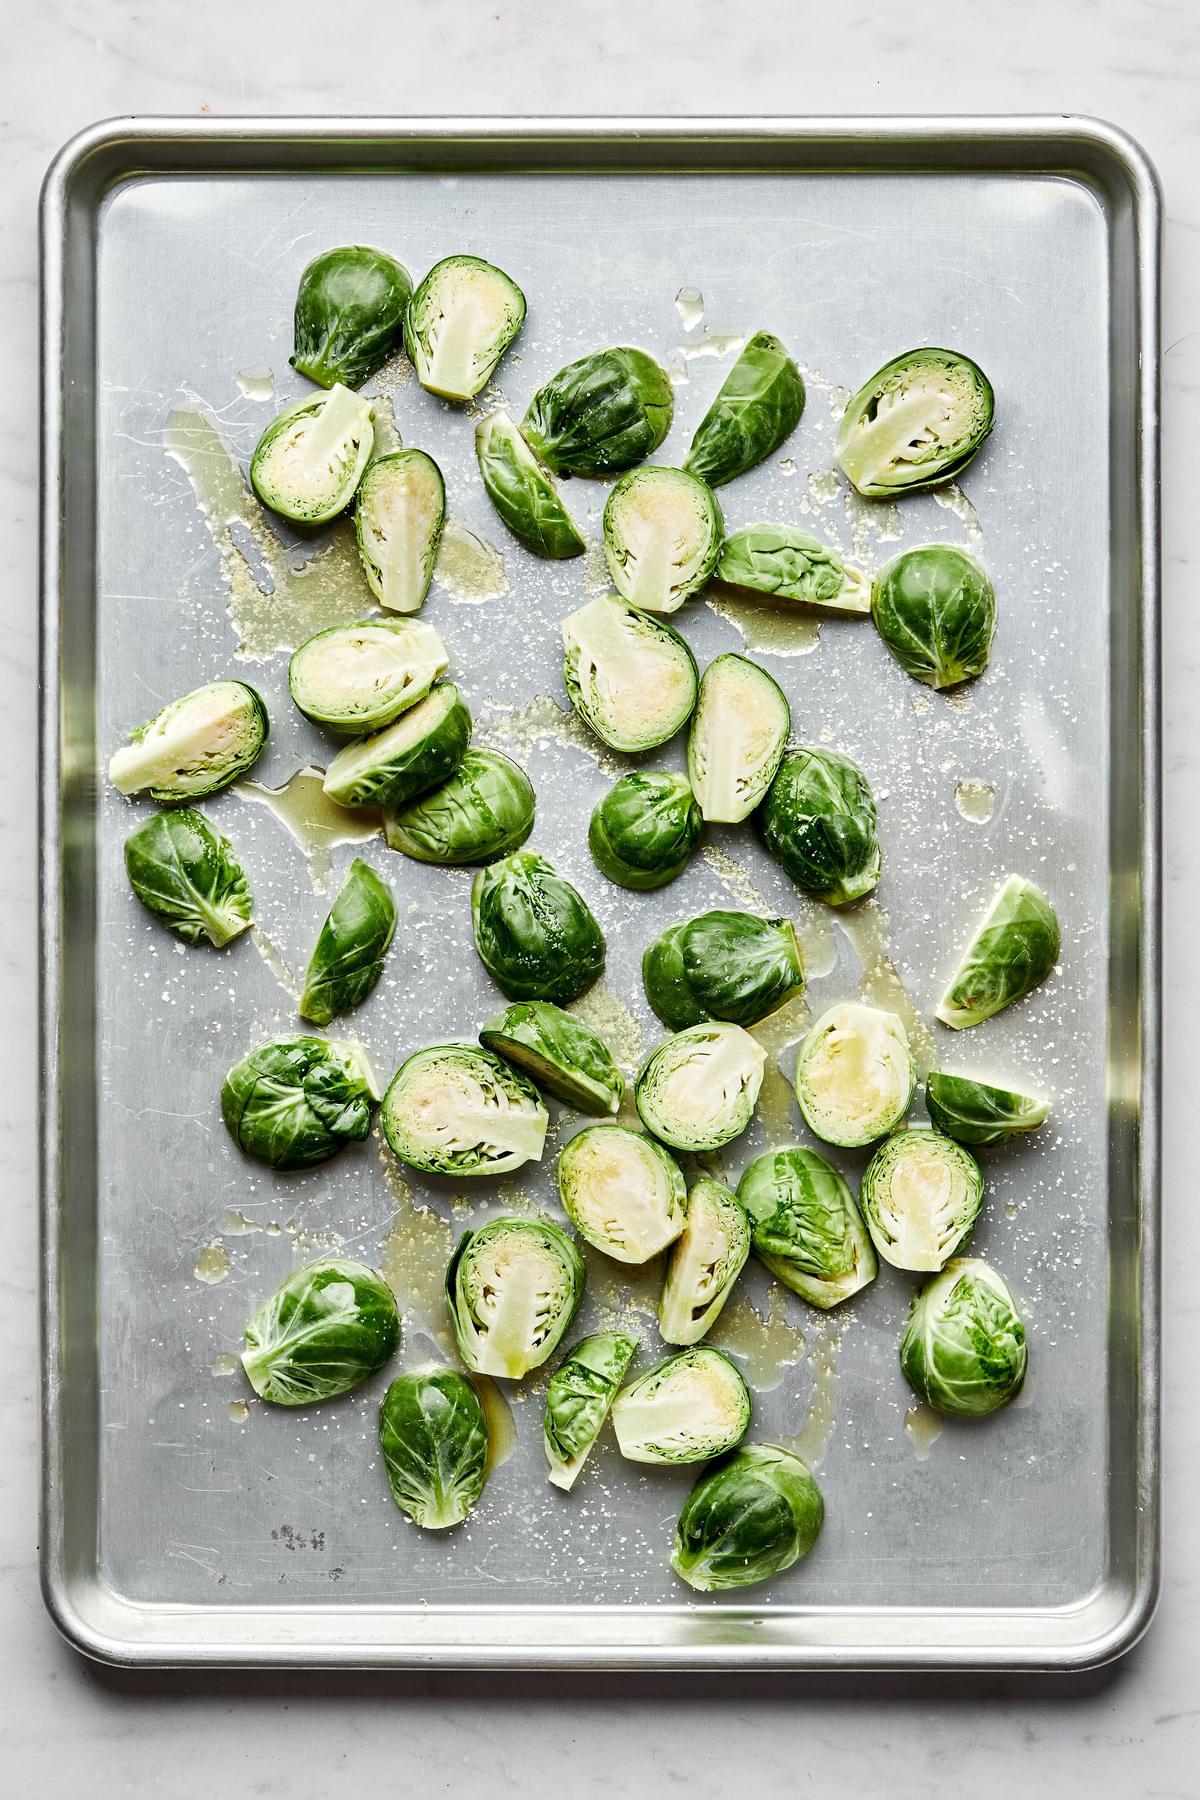 raw Brussels sprouts cut in half tossed in olive oil and salt on a baking sheet ready to be roasted in the oven